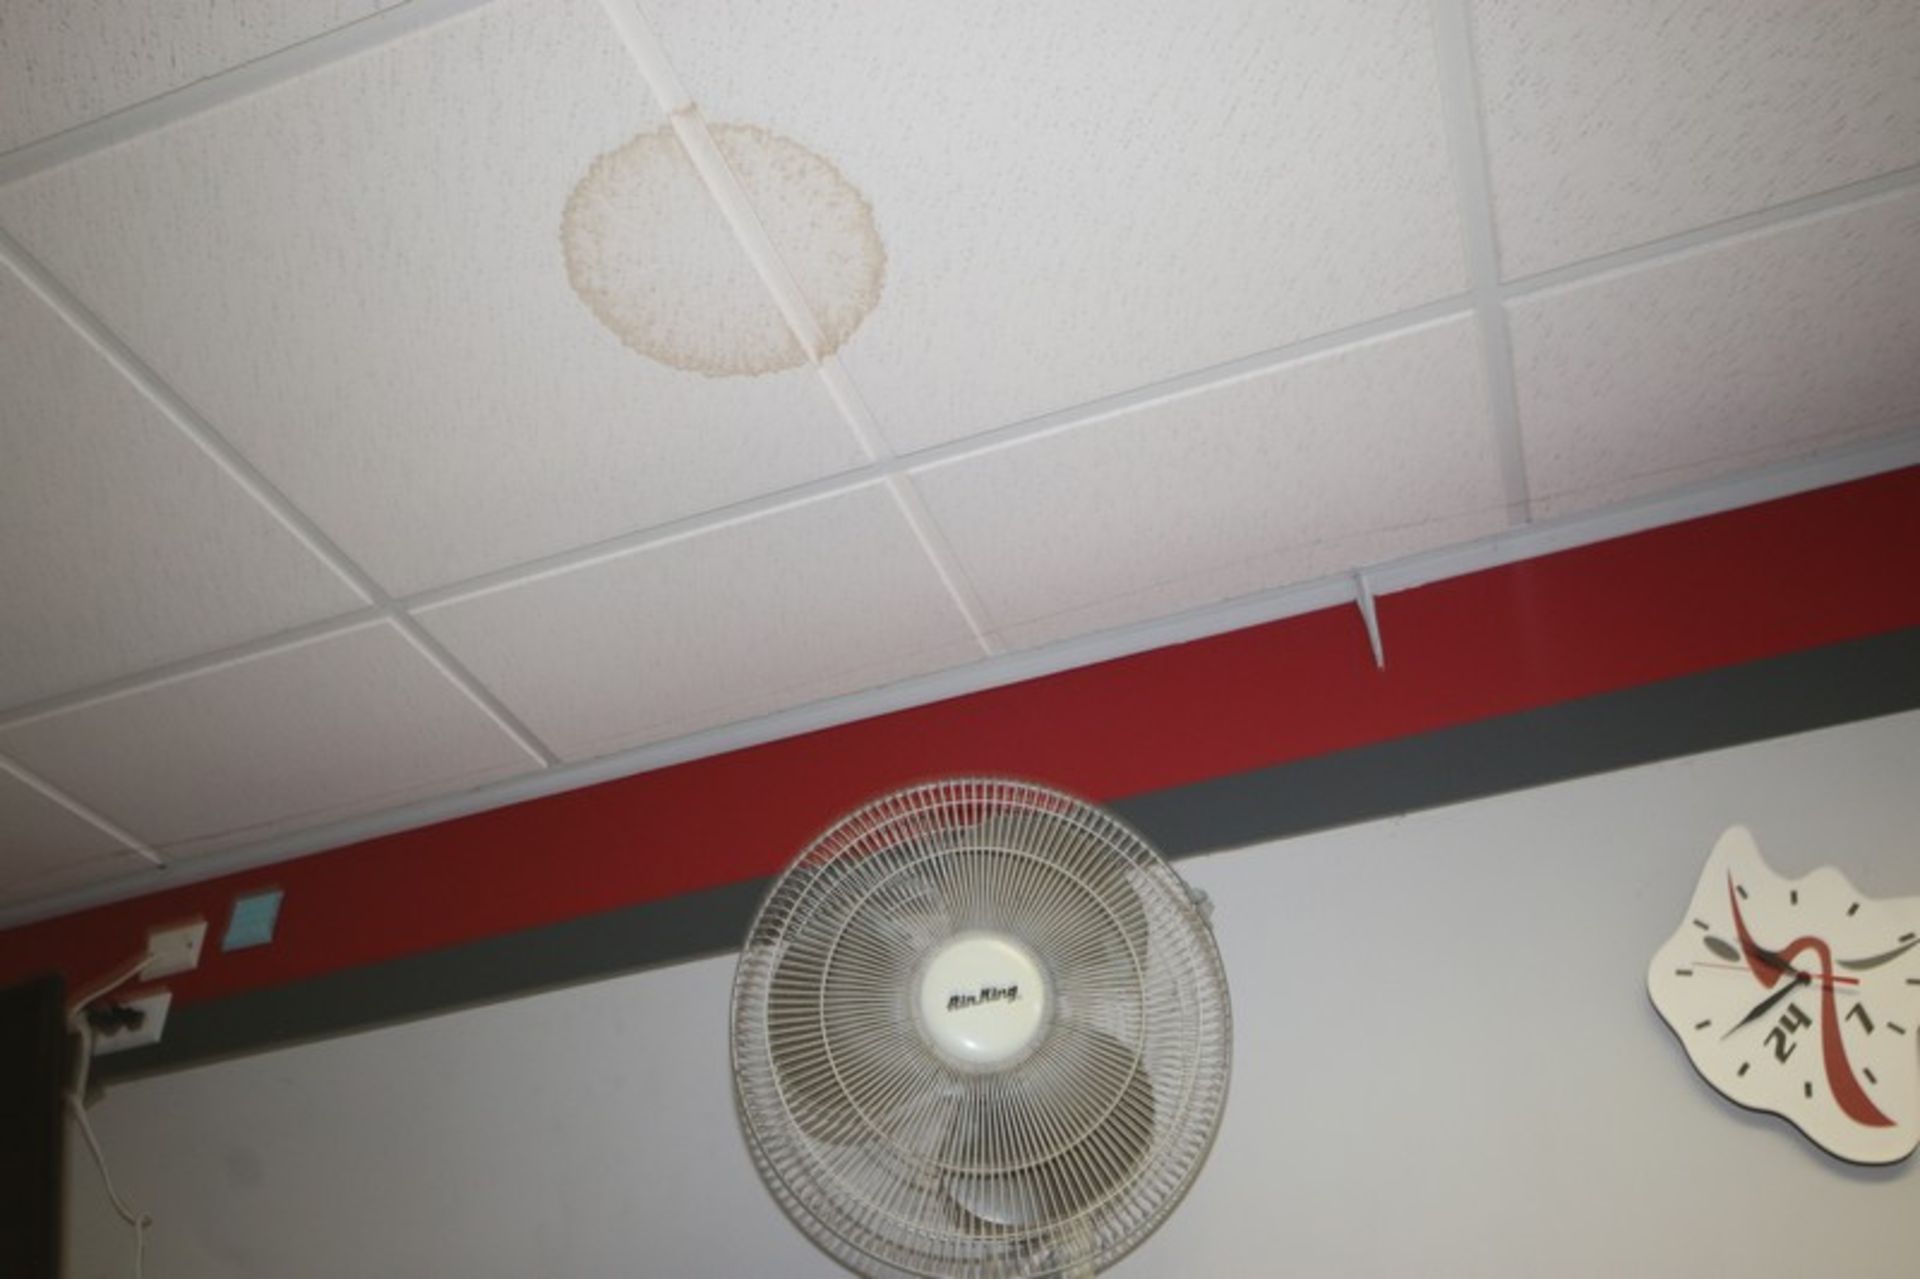 (3) Air King Wall Mounted Fans (LOCATED @ 2800 GOLDEN MILE HWY, ROUTE 286, PITTSBURGH, PA 15239) - Image 2 of 3